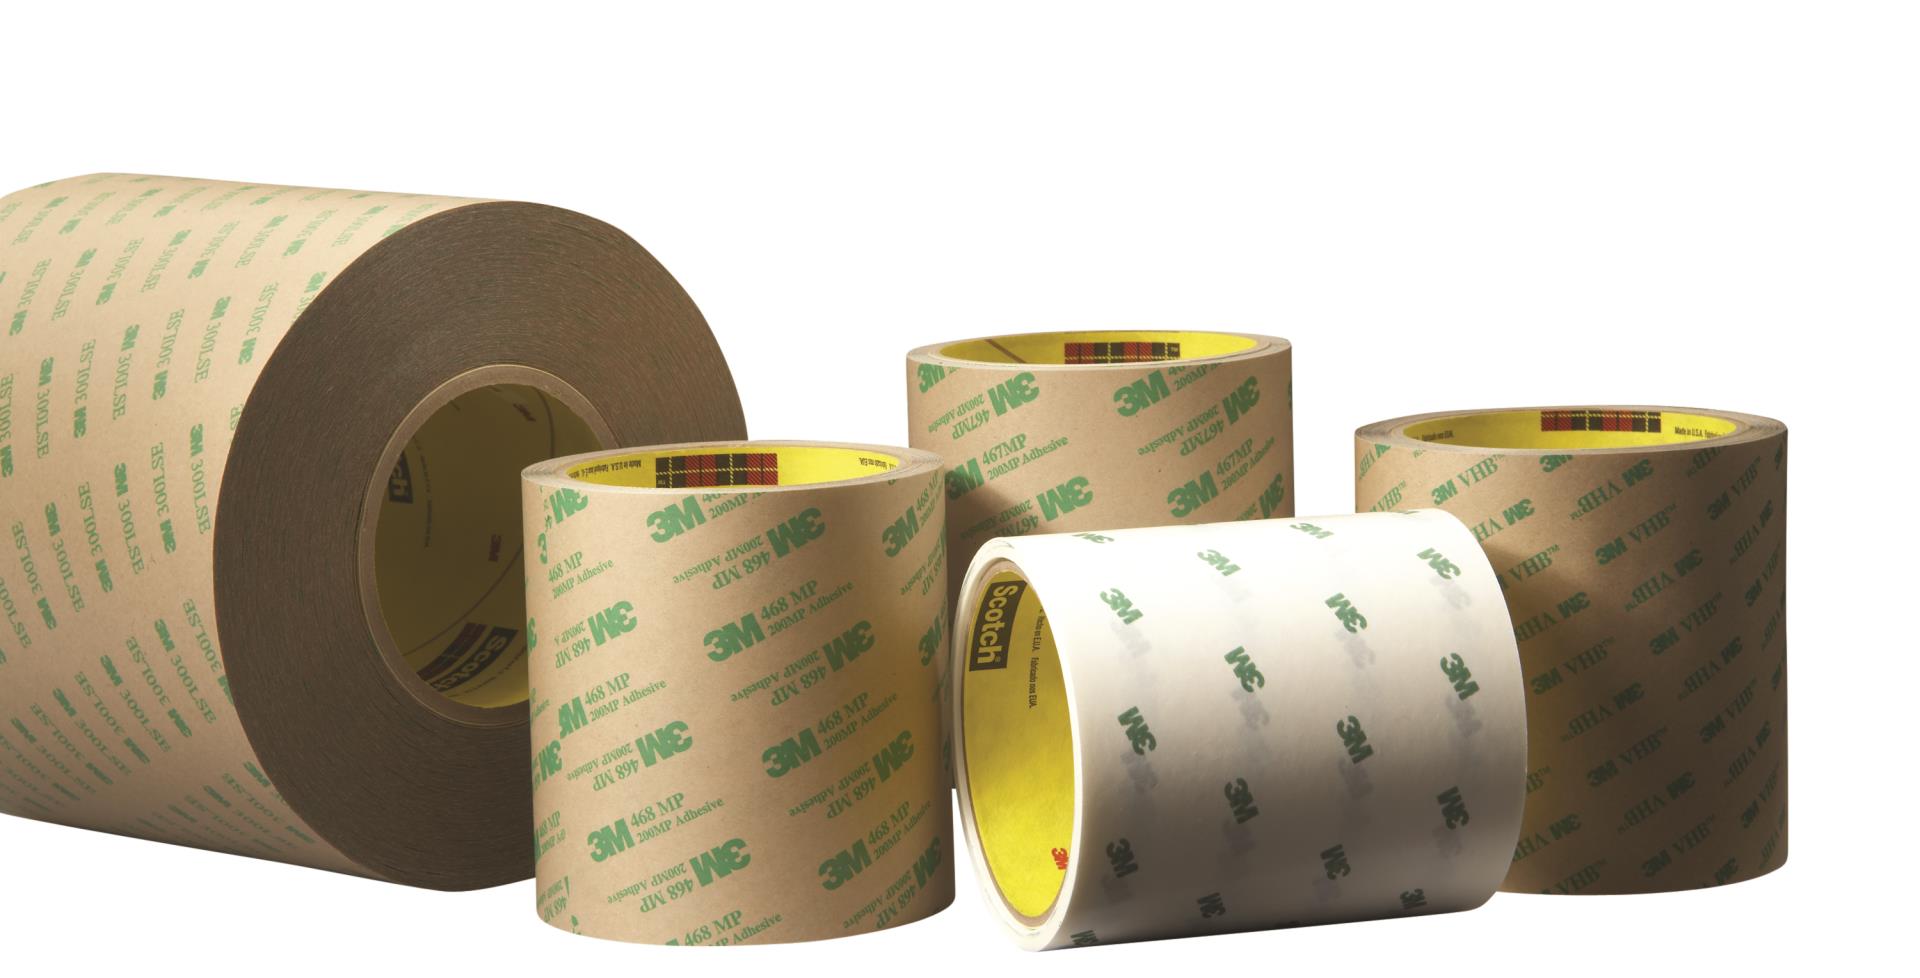 00048011581491 3M™ Ultra High Temperature Adhesive Transfer Tape 9082  Clear, 1/4 in x 60 yd, mil, 36 rolls per case Aircraft products  adhesive-transfer-tapes 9359233